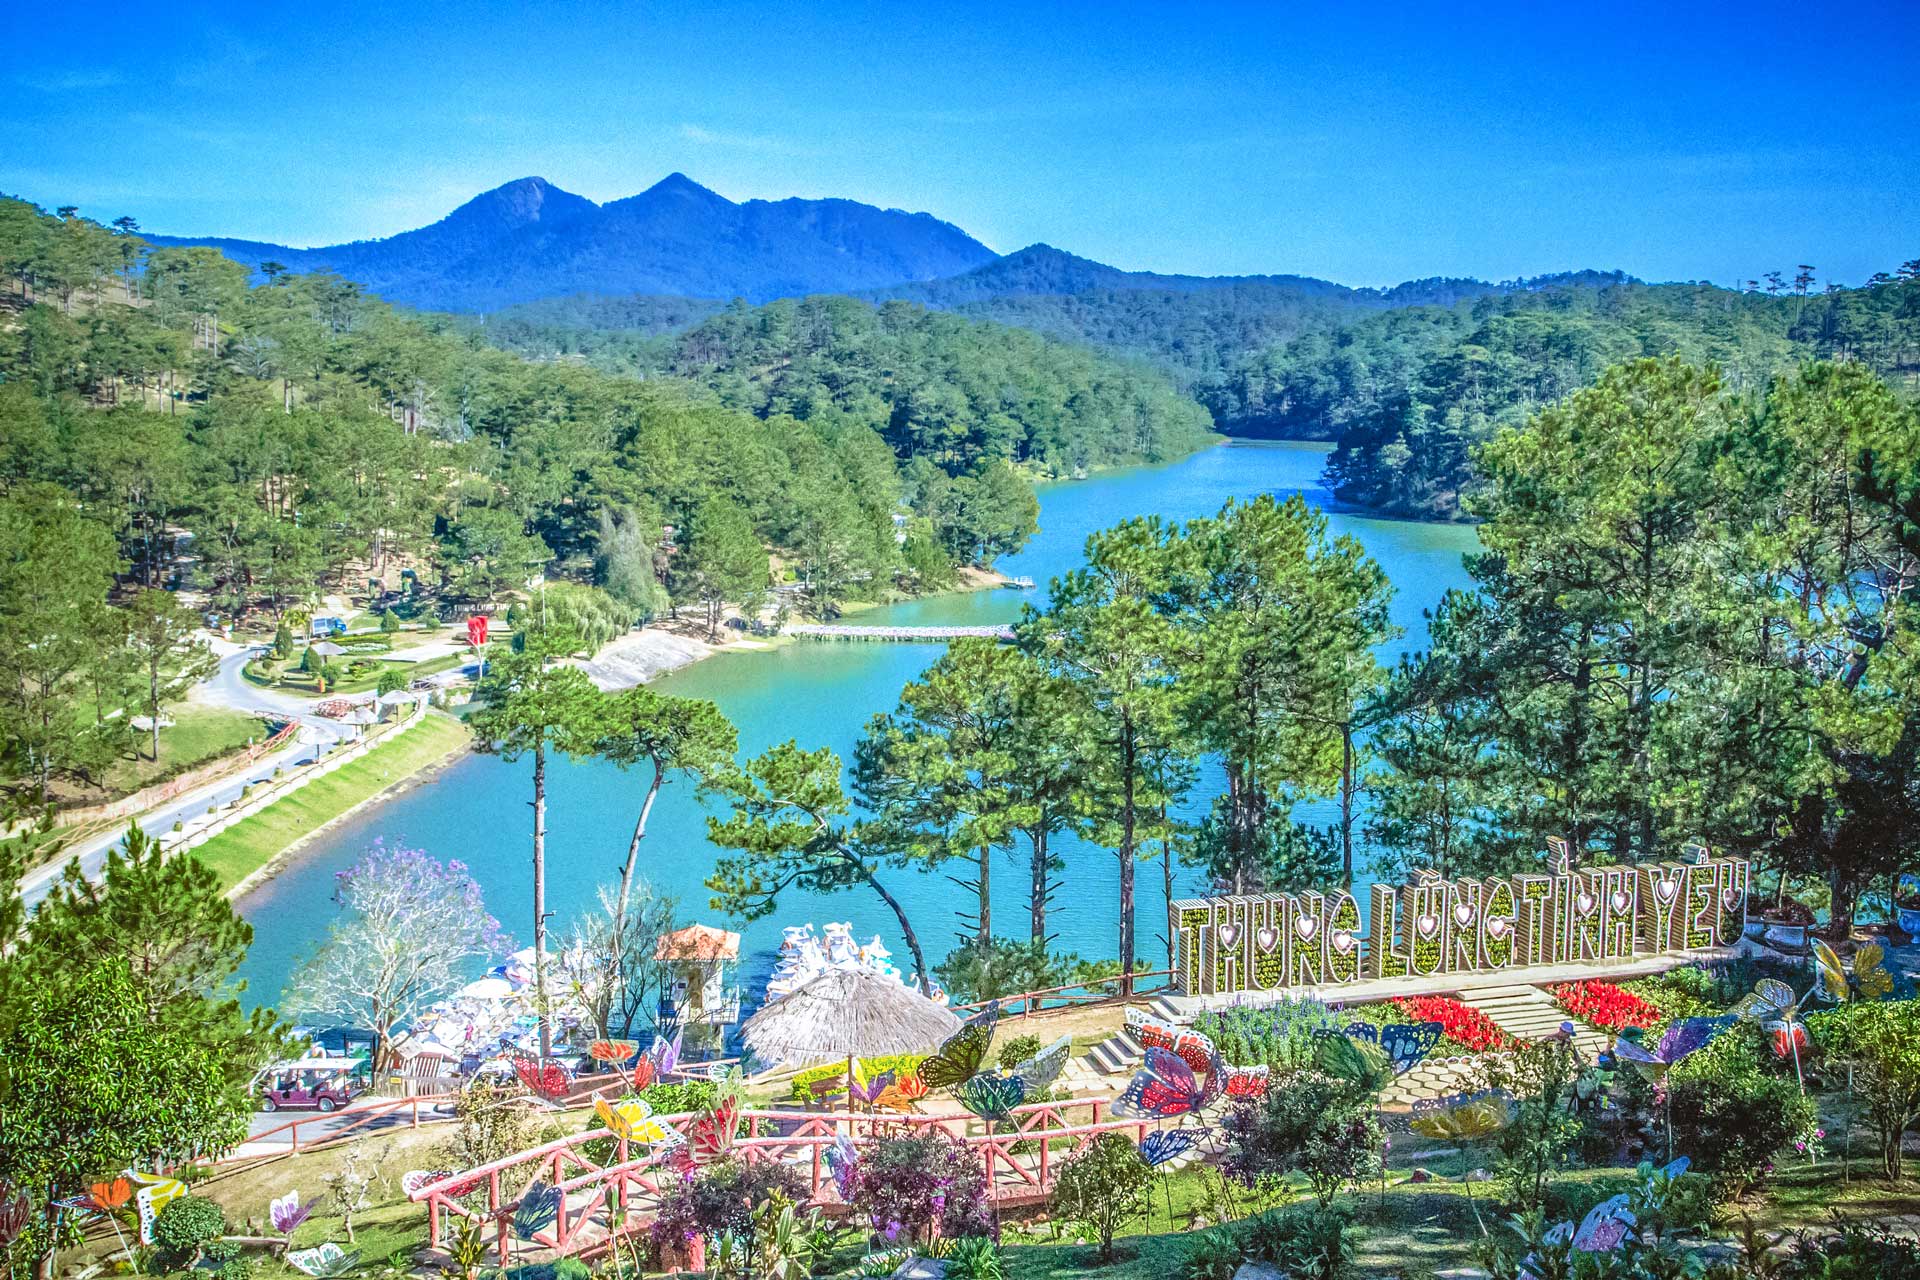 TRAVELING TO DALAT ON TET HOLIDAY 2021, WHAT'S SPECIAL?